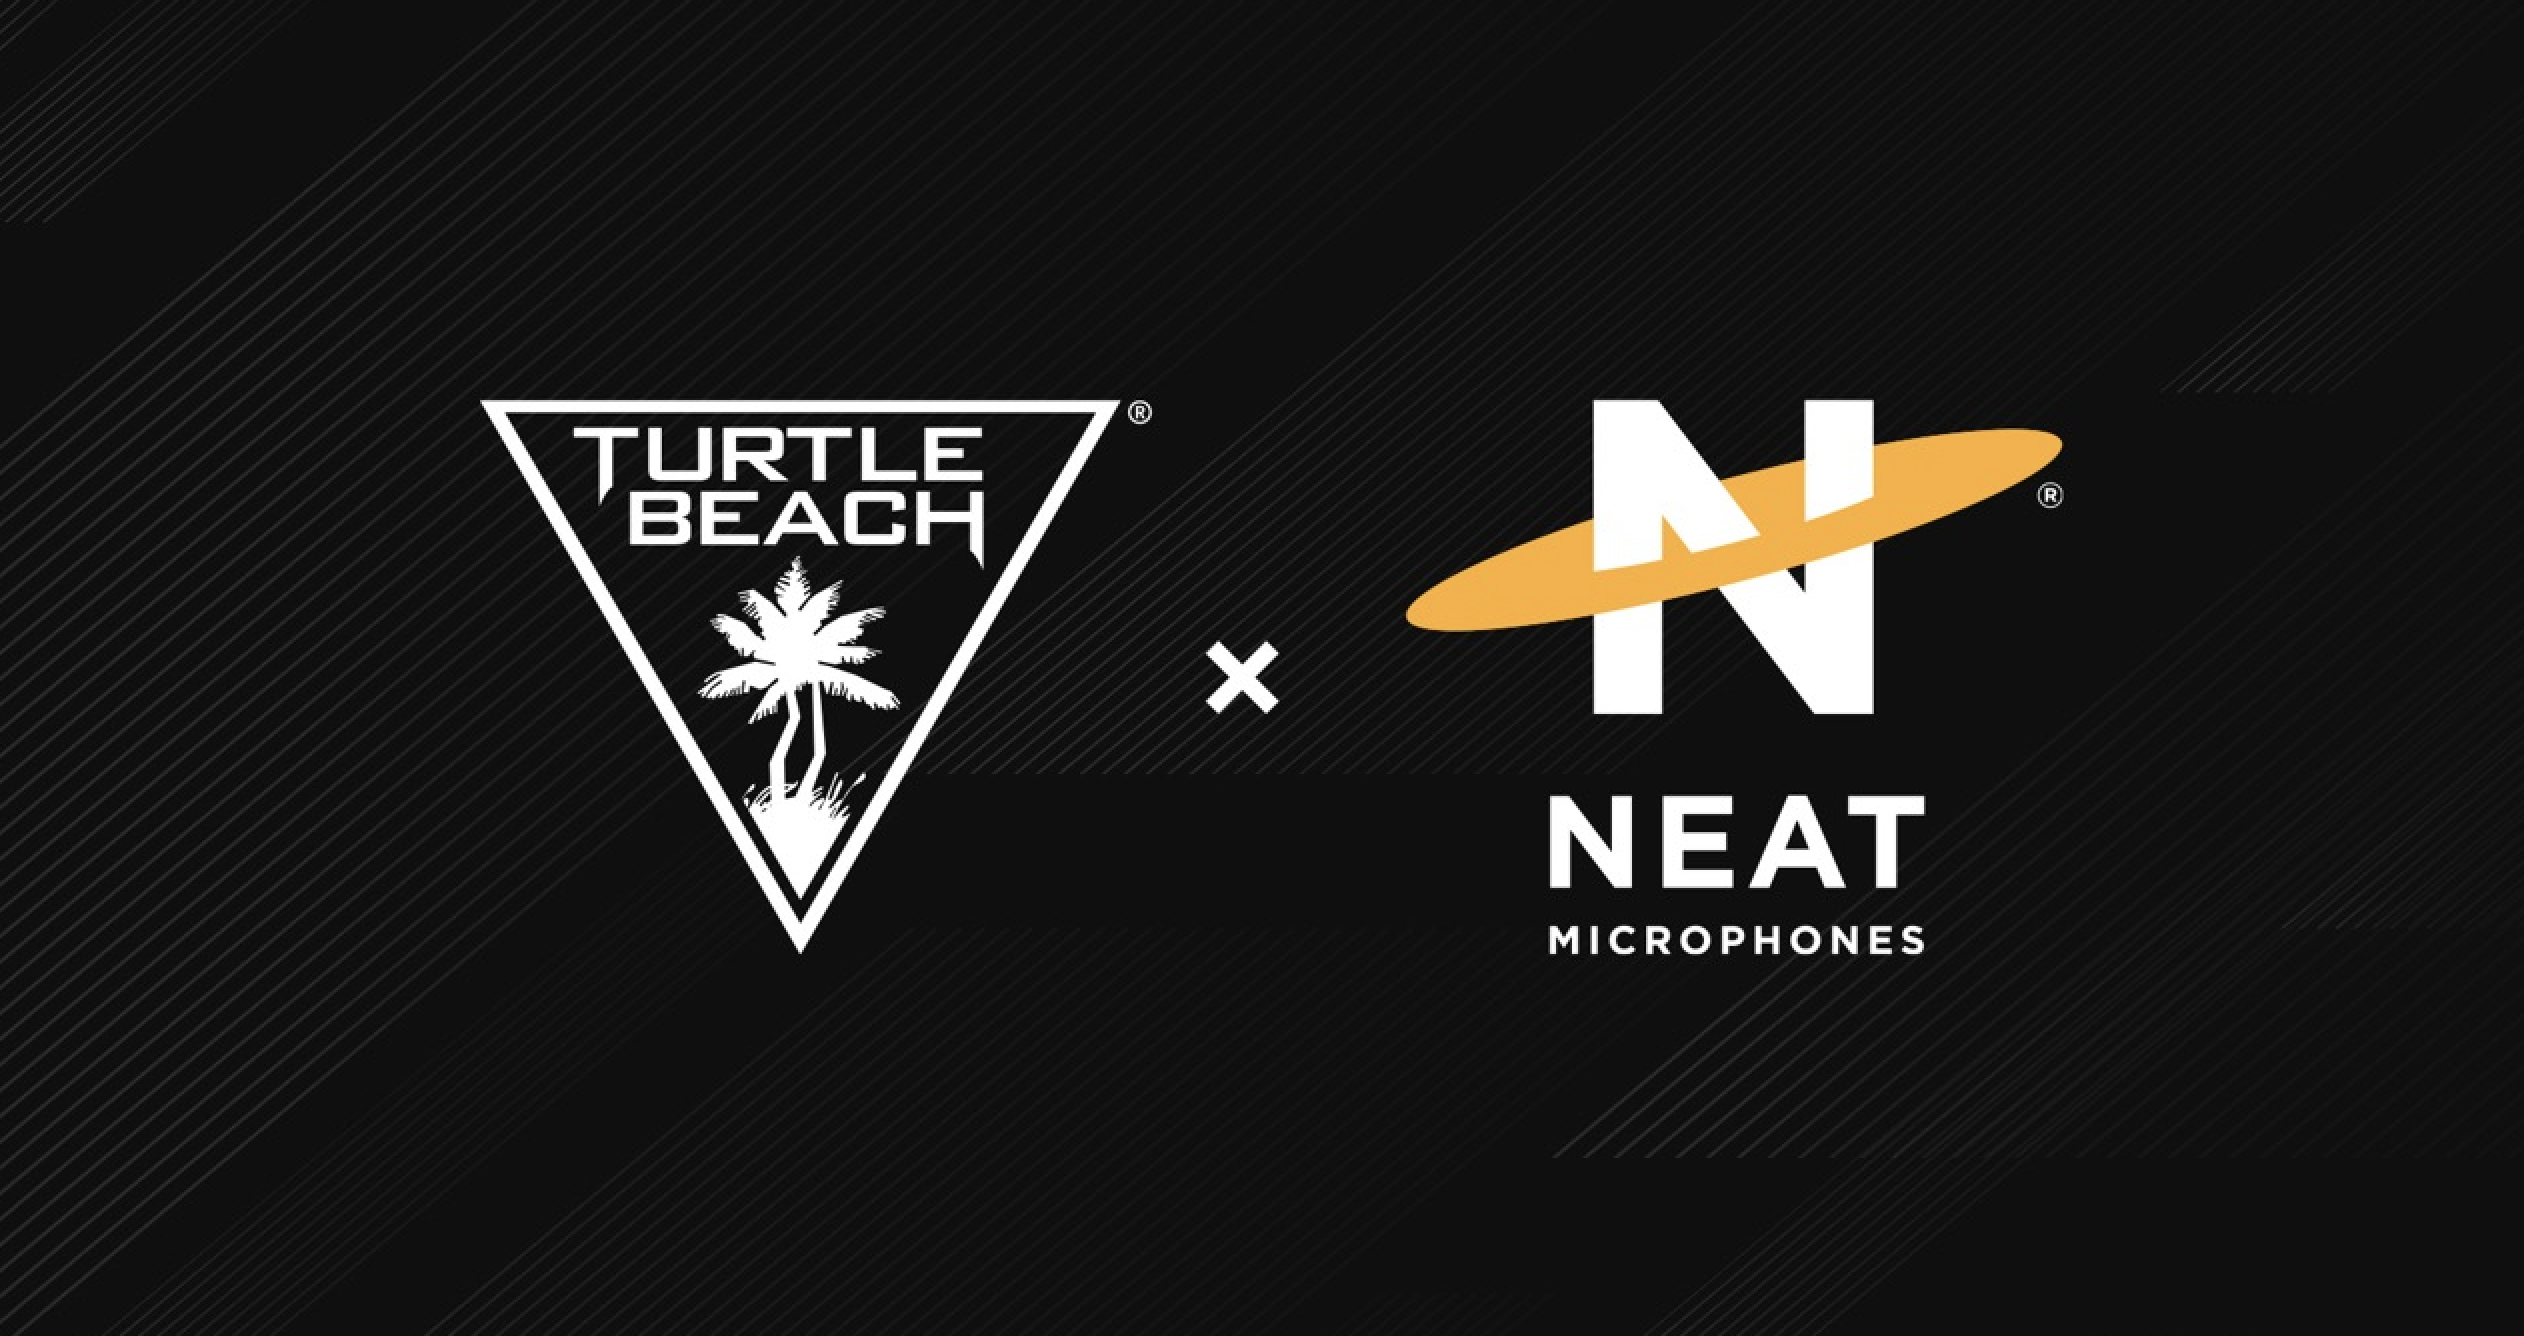 Turtle Beach announces the acquisition of Neat Microphones